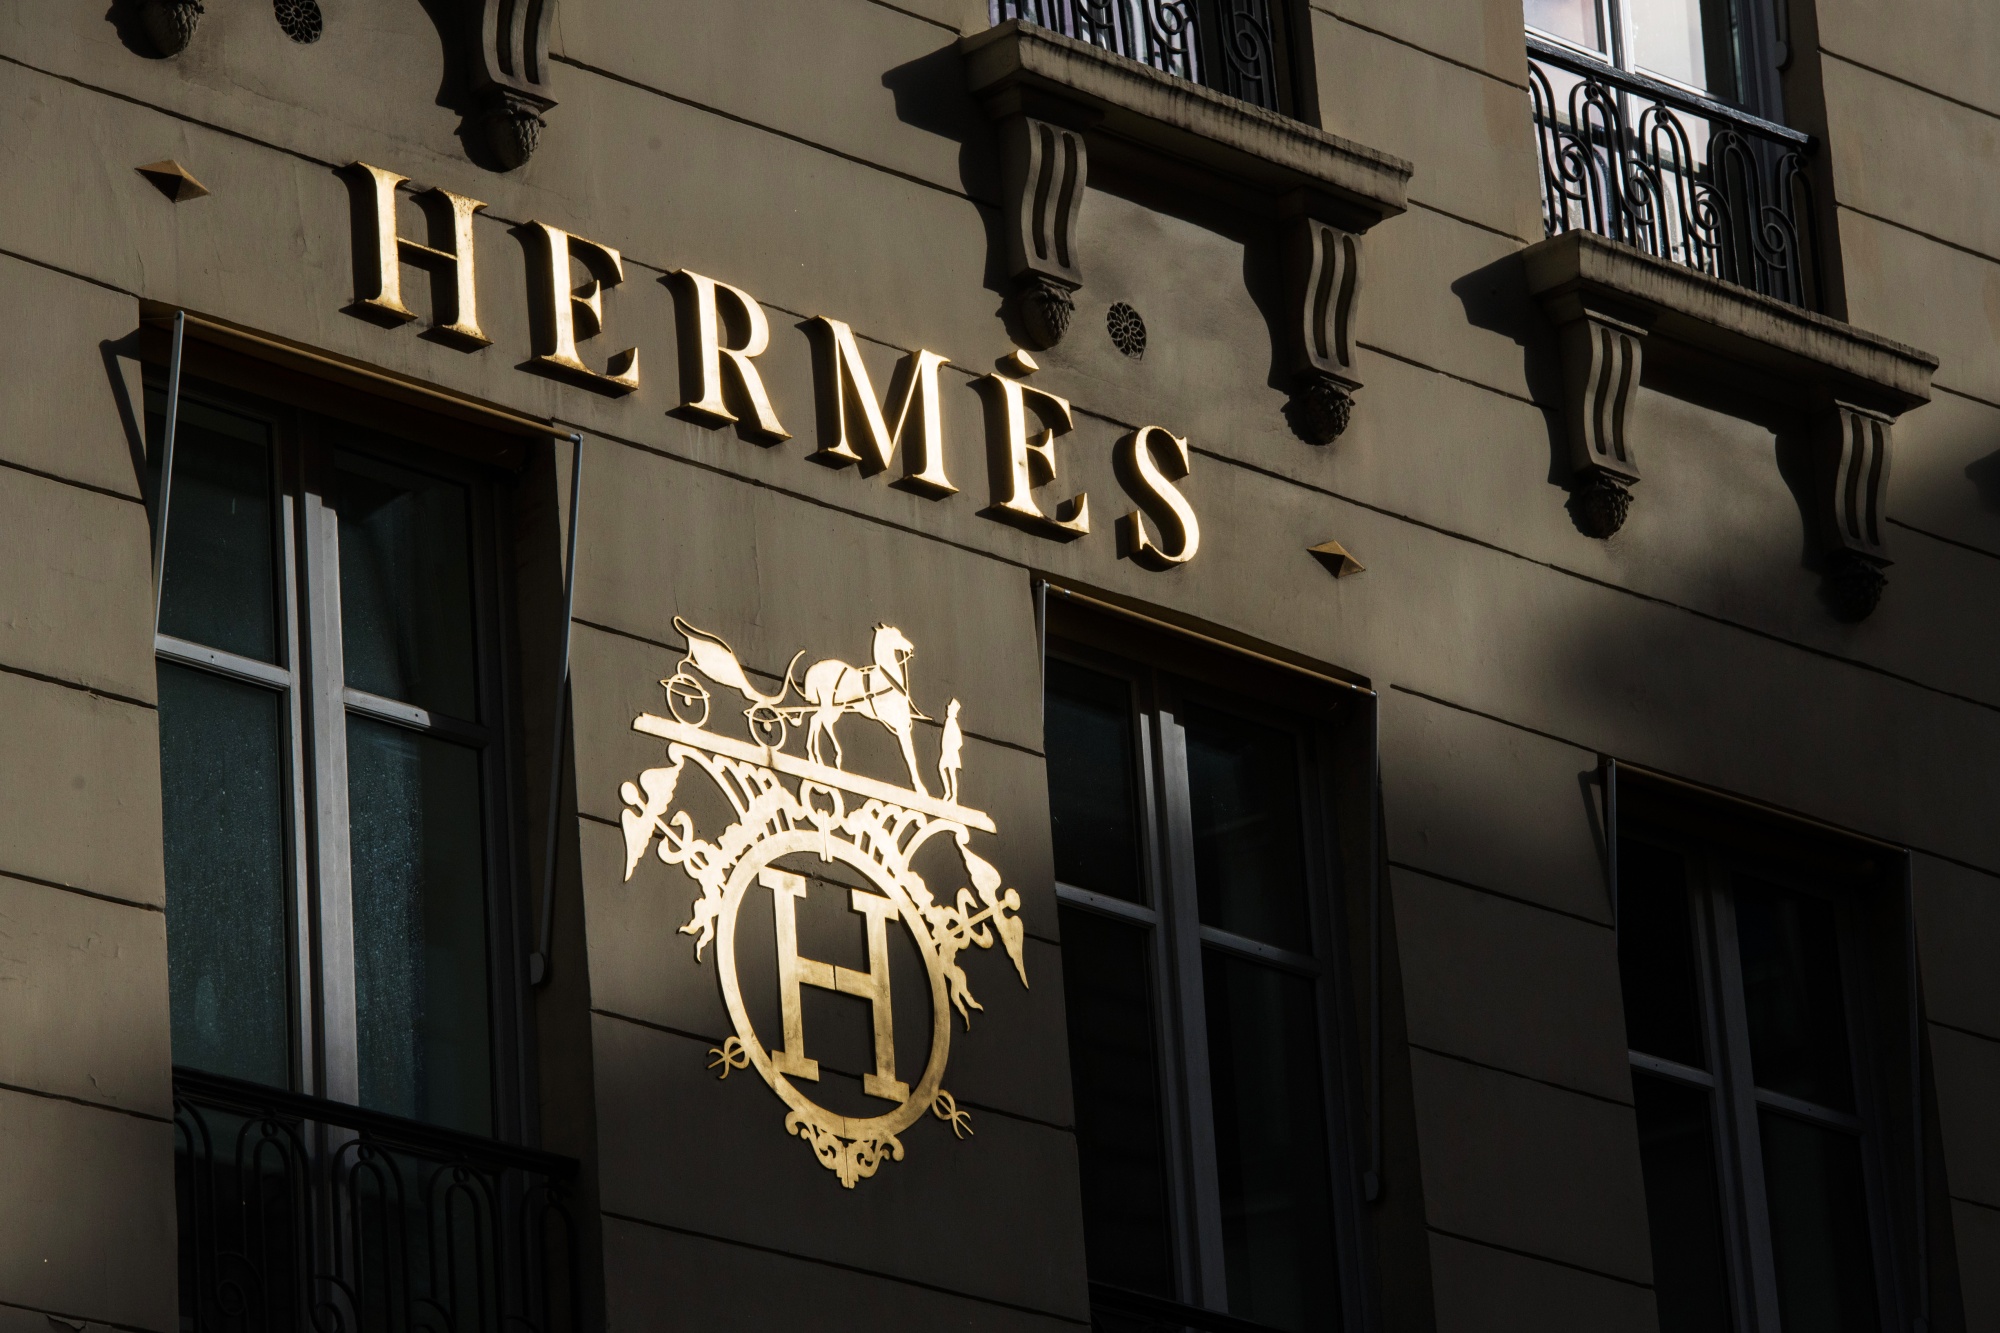 Hermes Trial Over “MetaBirkin” NFTs Puts Trademark Rights to the Test